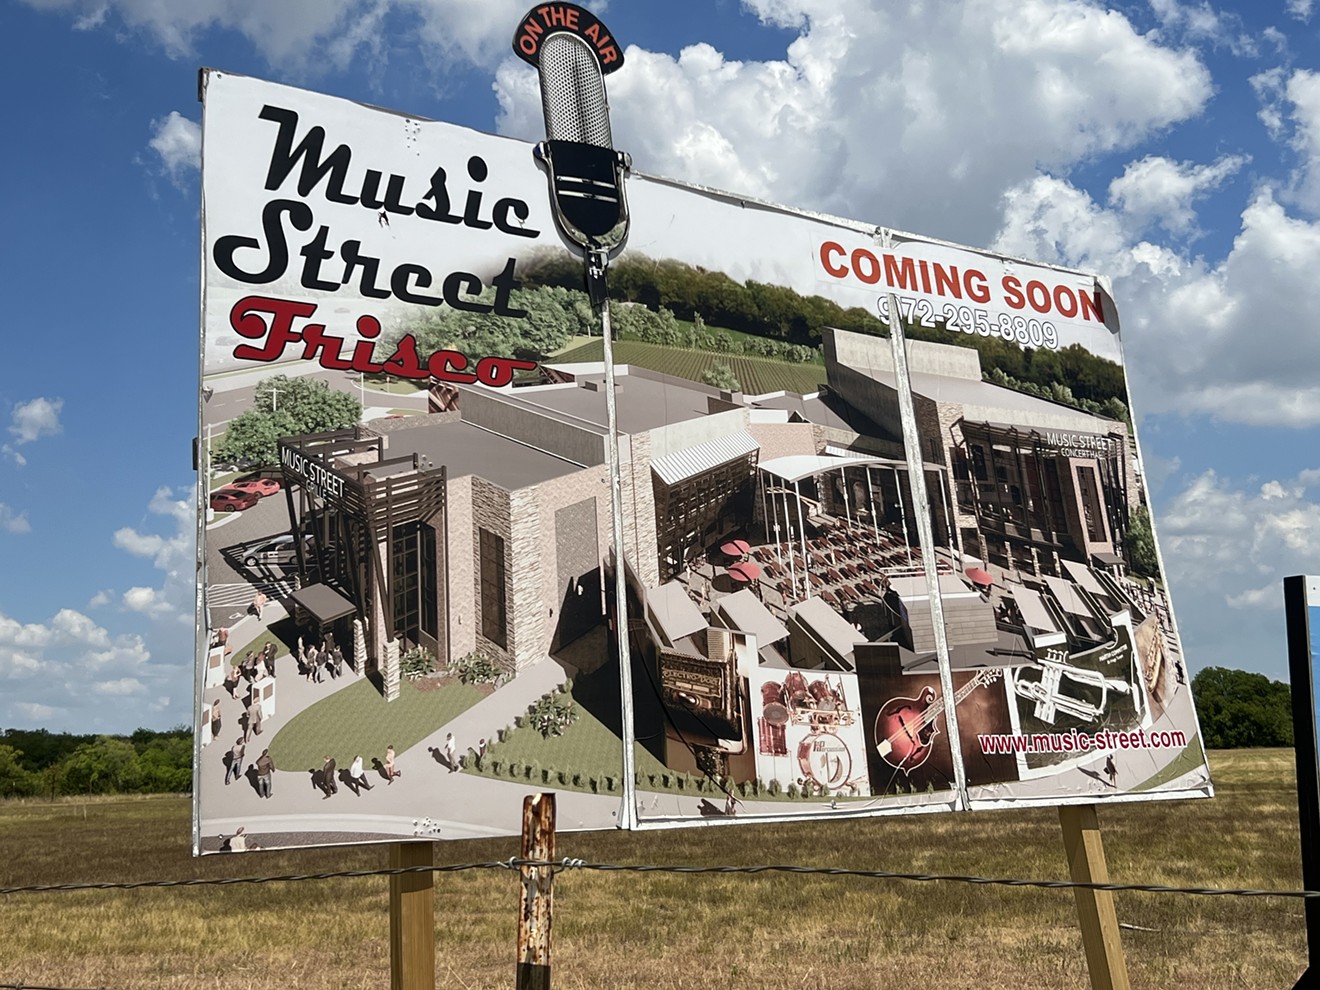 Music Street Frisco was originally expected to be complete early last year.